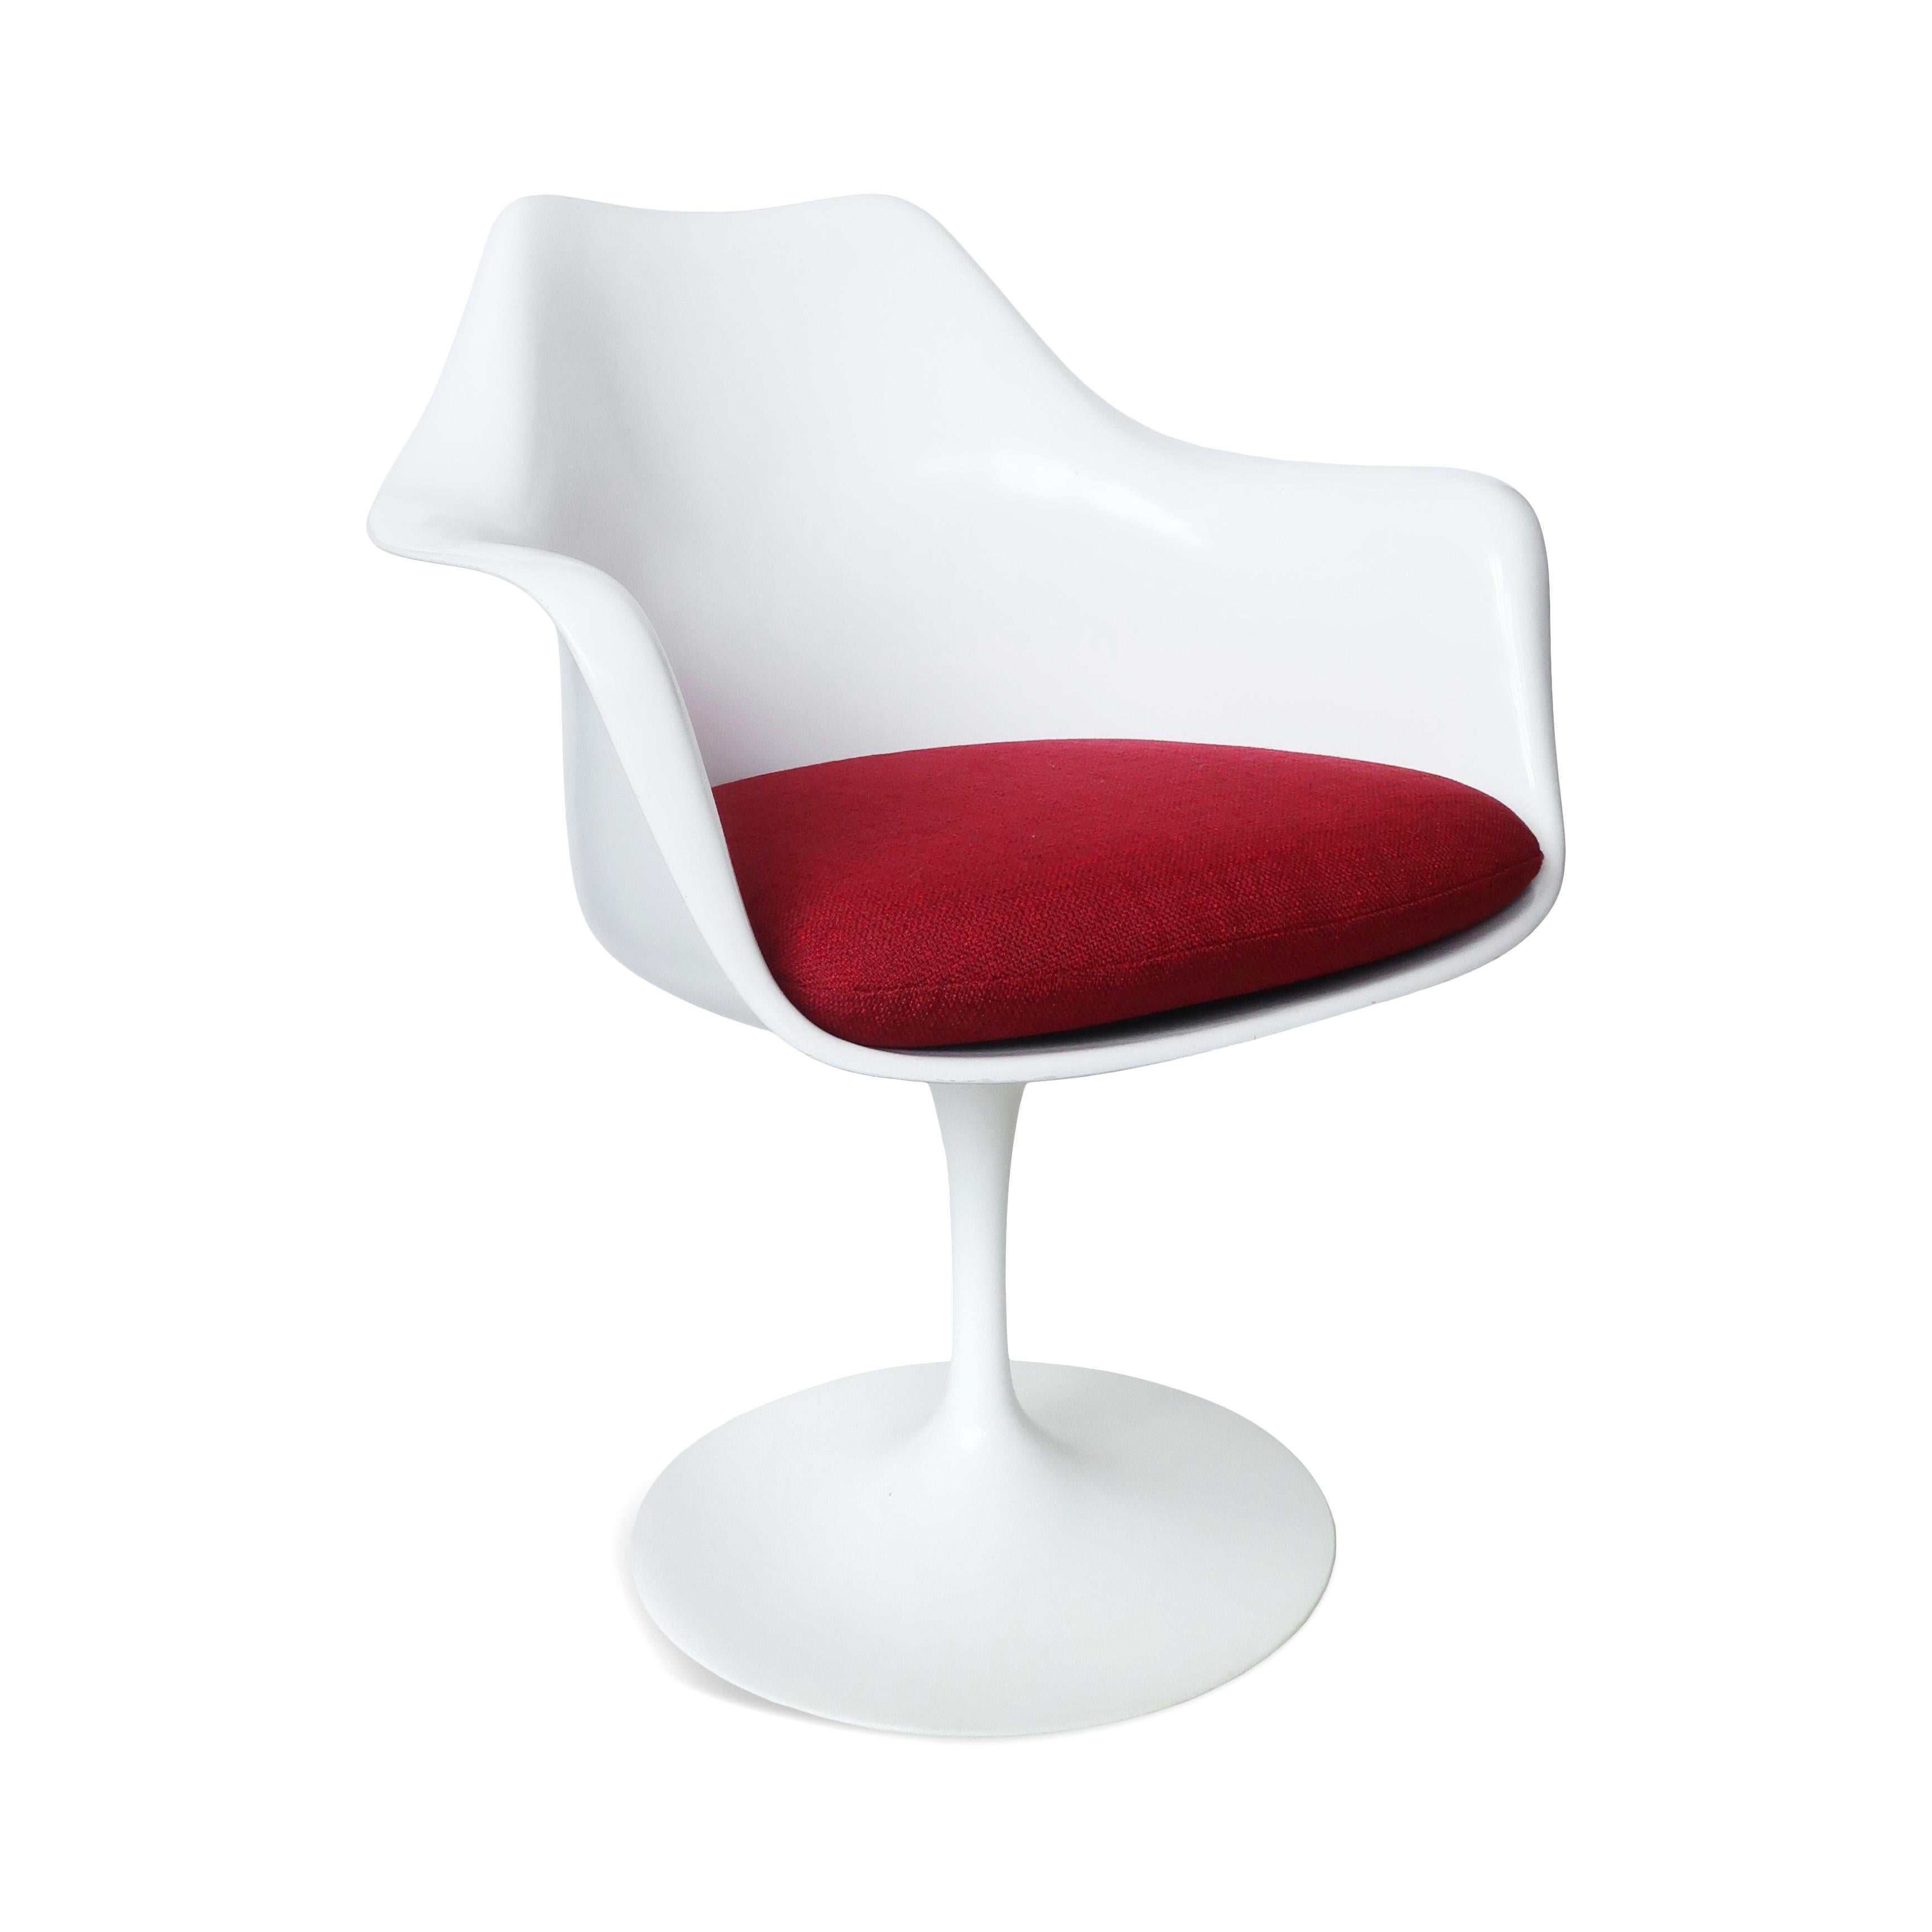 A classic piece of modern design combining elegance and functionality, the Knoll tulip armchair was designed by Eero Saarinen in 1957.  It features a sleek and sculptural shape that eliminates the clutter of legs and creates a seamless look. It has